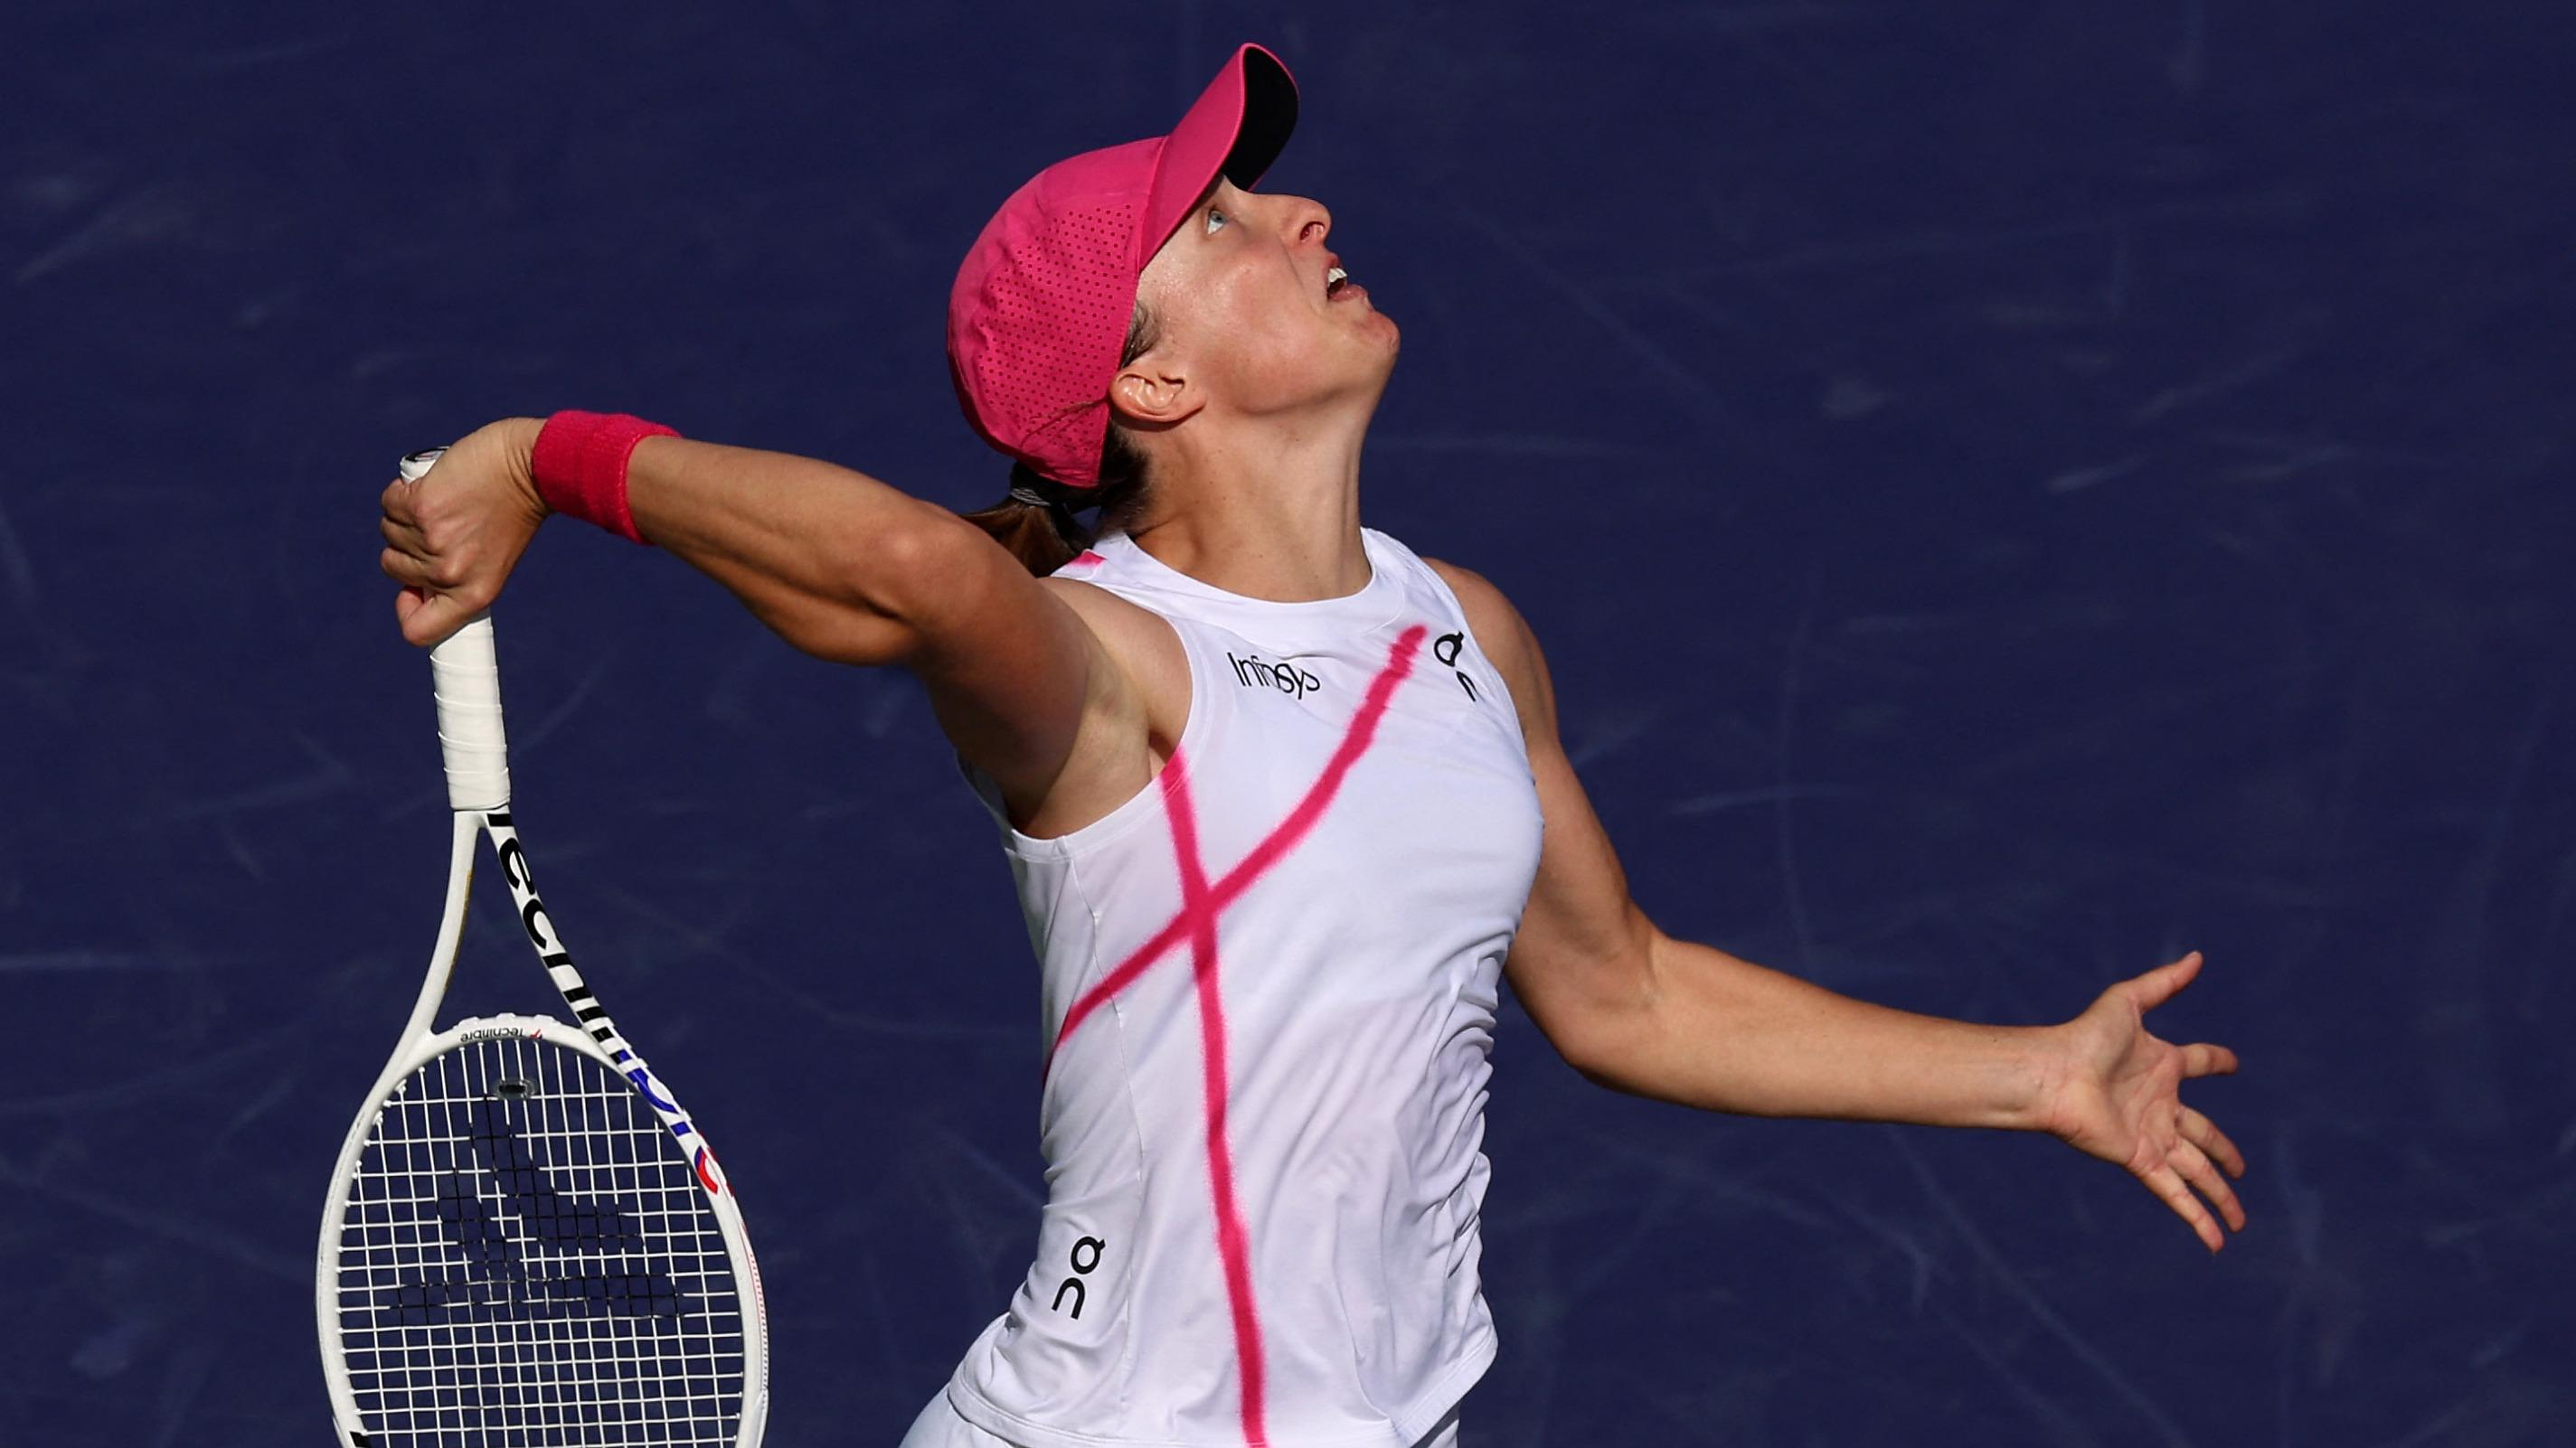 Tennis: Swiatek takes revenge on Noskova and advances to the 3rd round at Indian Wells